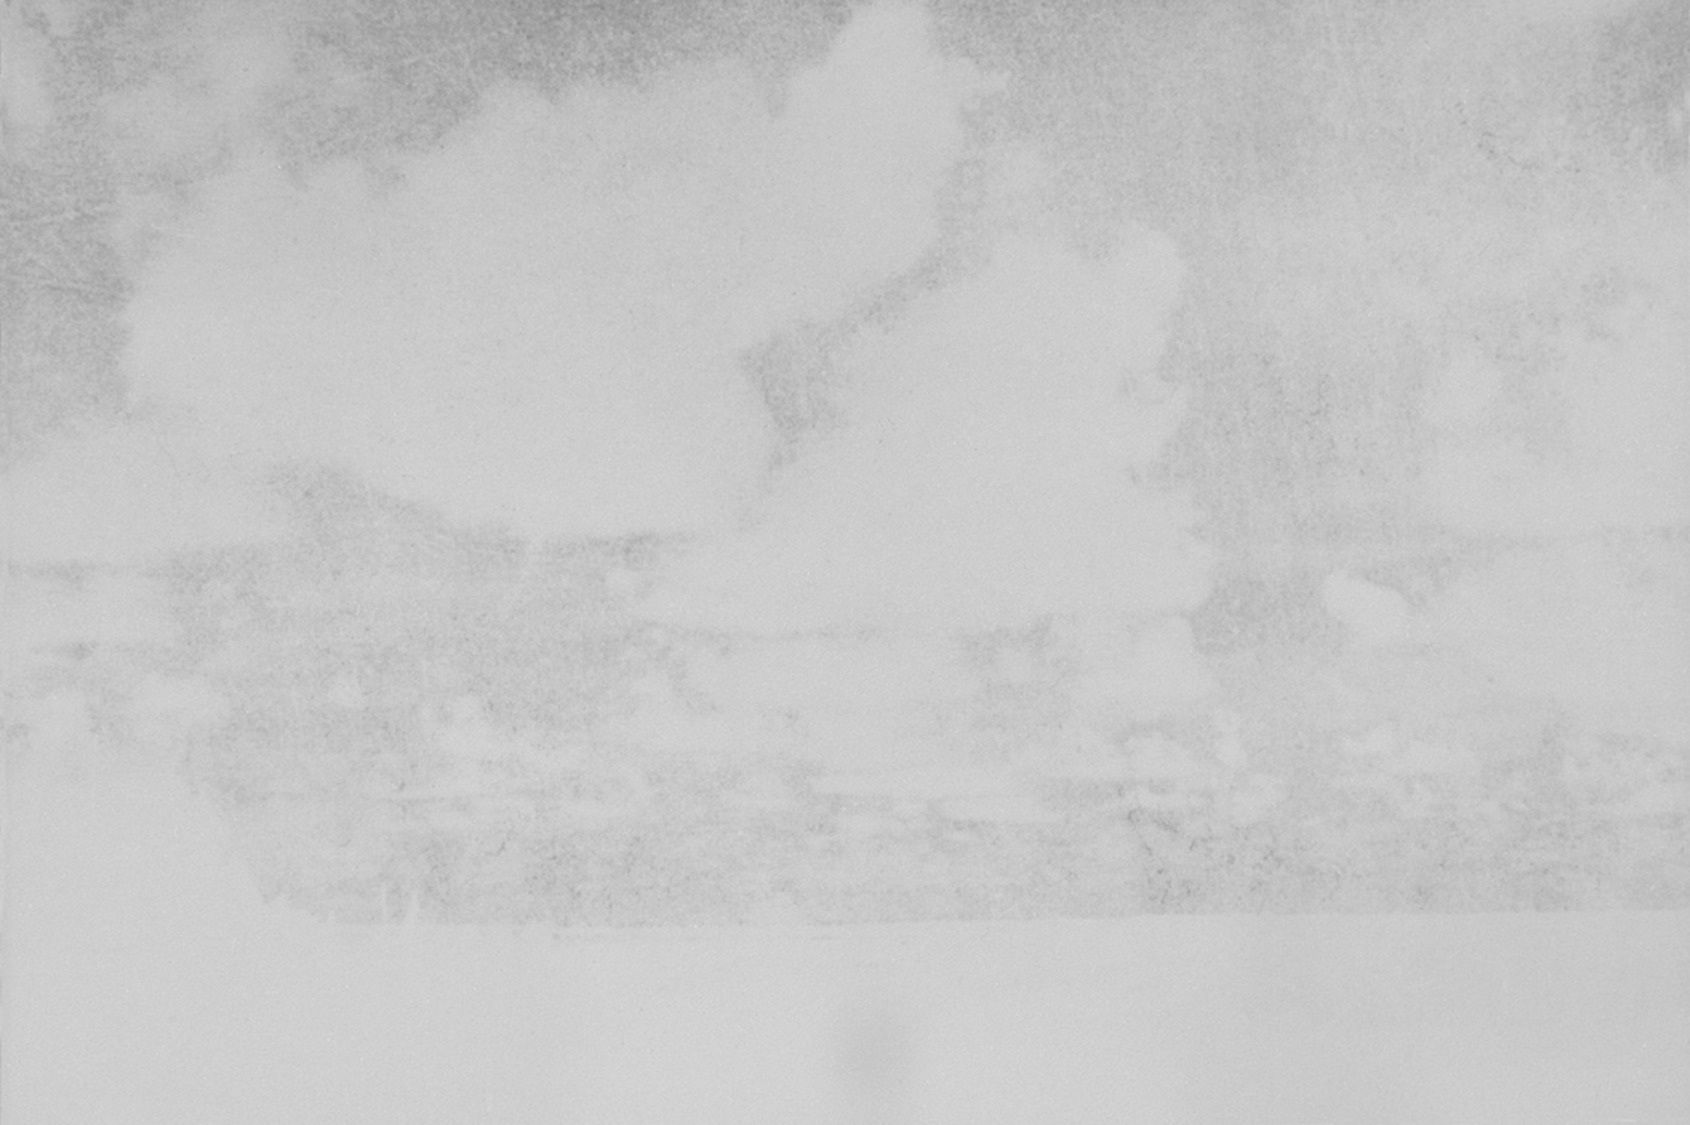  Clouds 254-02, Jean Claude Wouters, 2009, 80×121cm. On llford mat baryte paper,with sistan silver lmage stabilizer treatment. Courtesy of artist. 